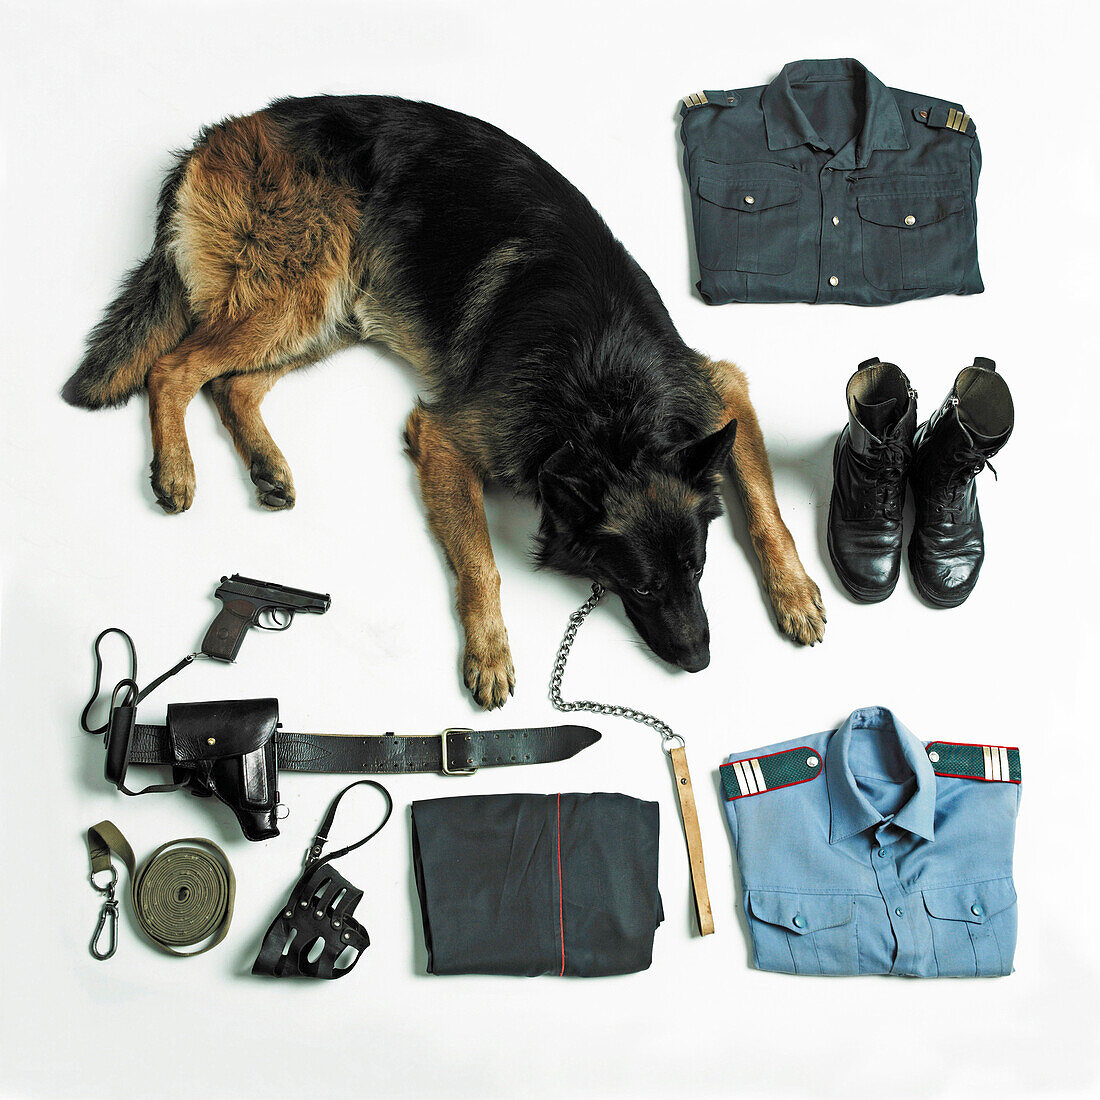 Organized police uniform and equipment with dog